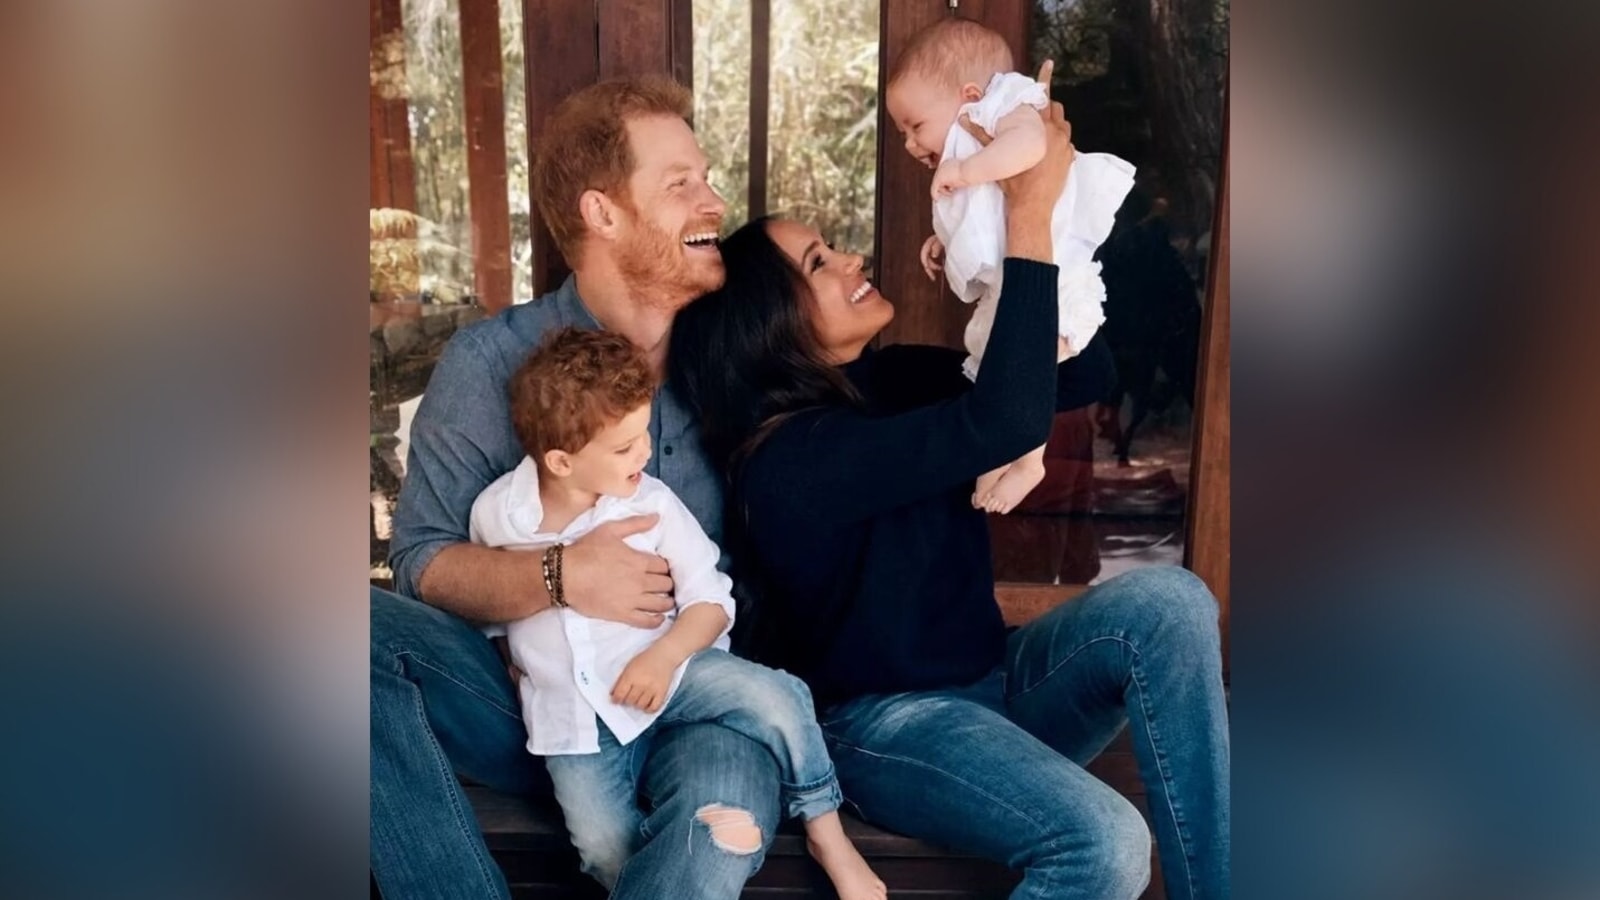 Meghan and Harry share first photo of daughter Lilibet, son Archie is